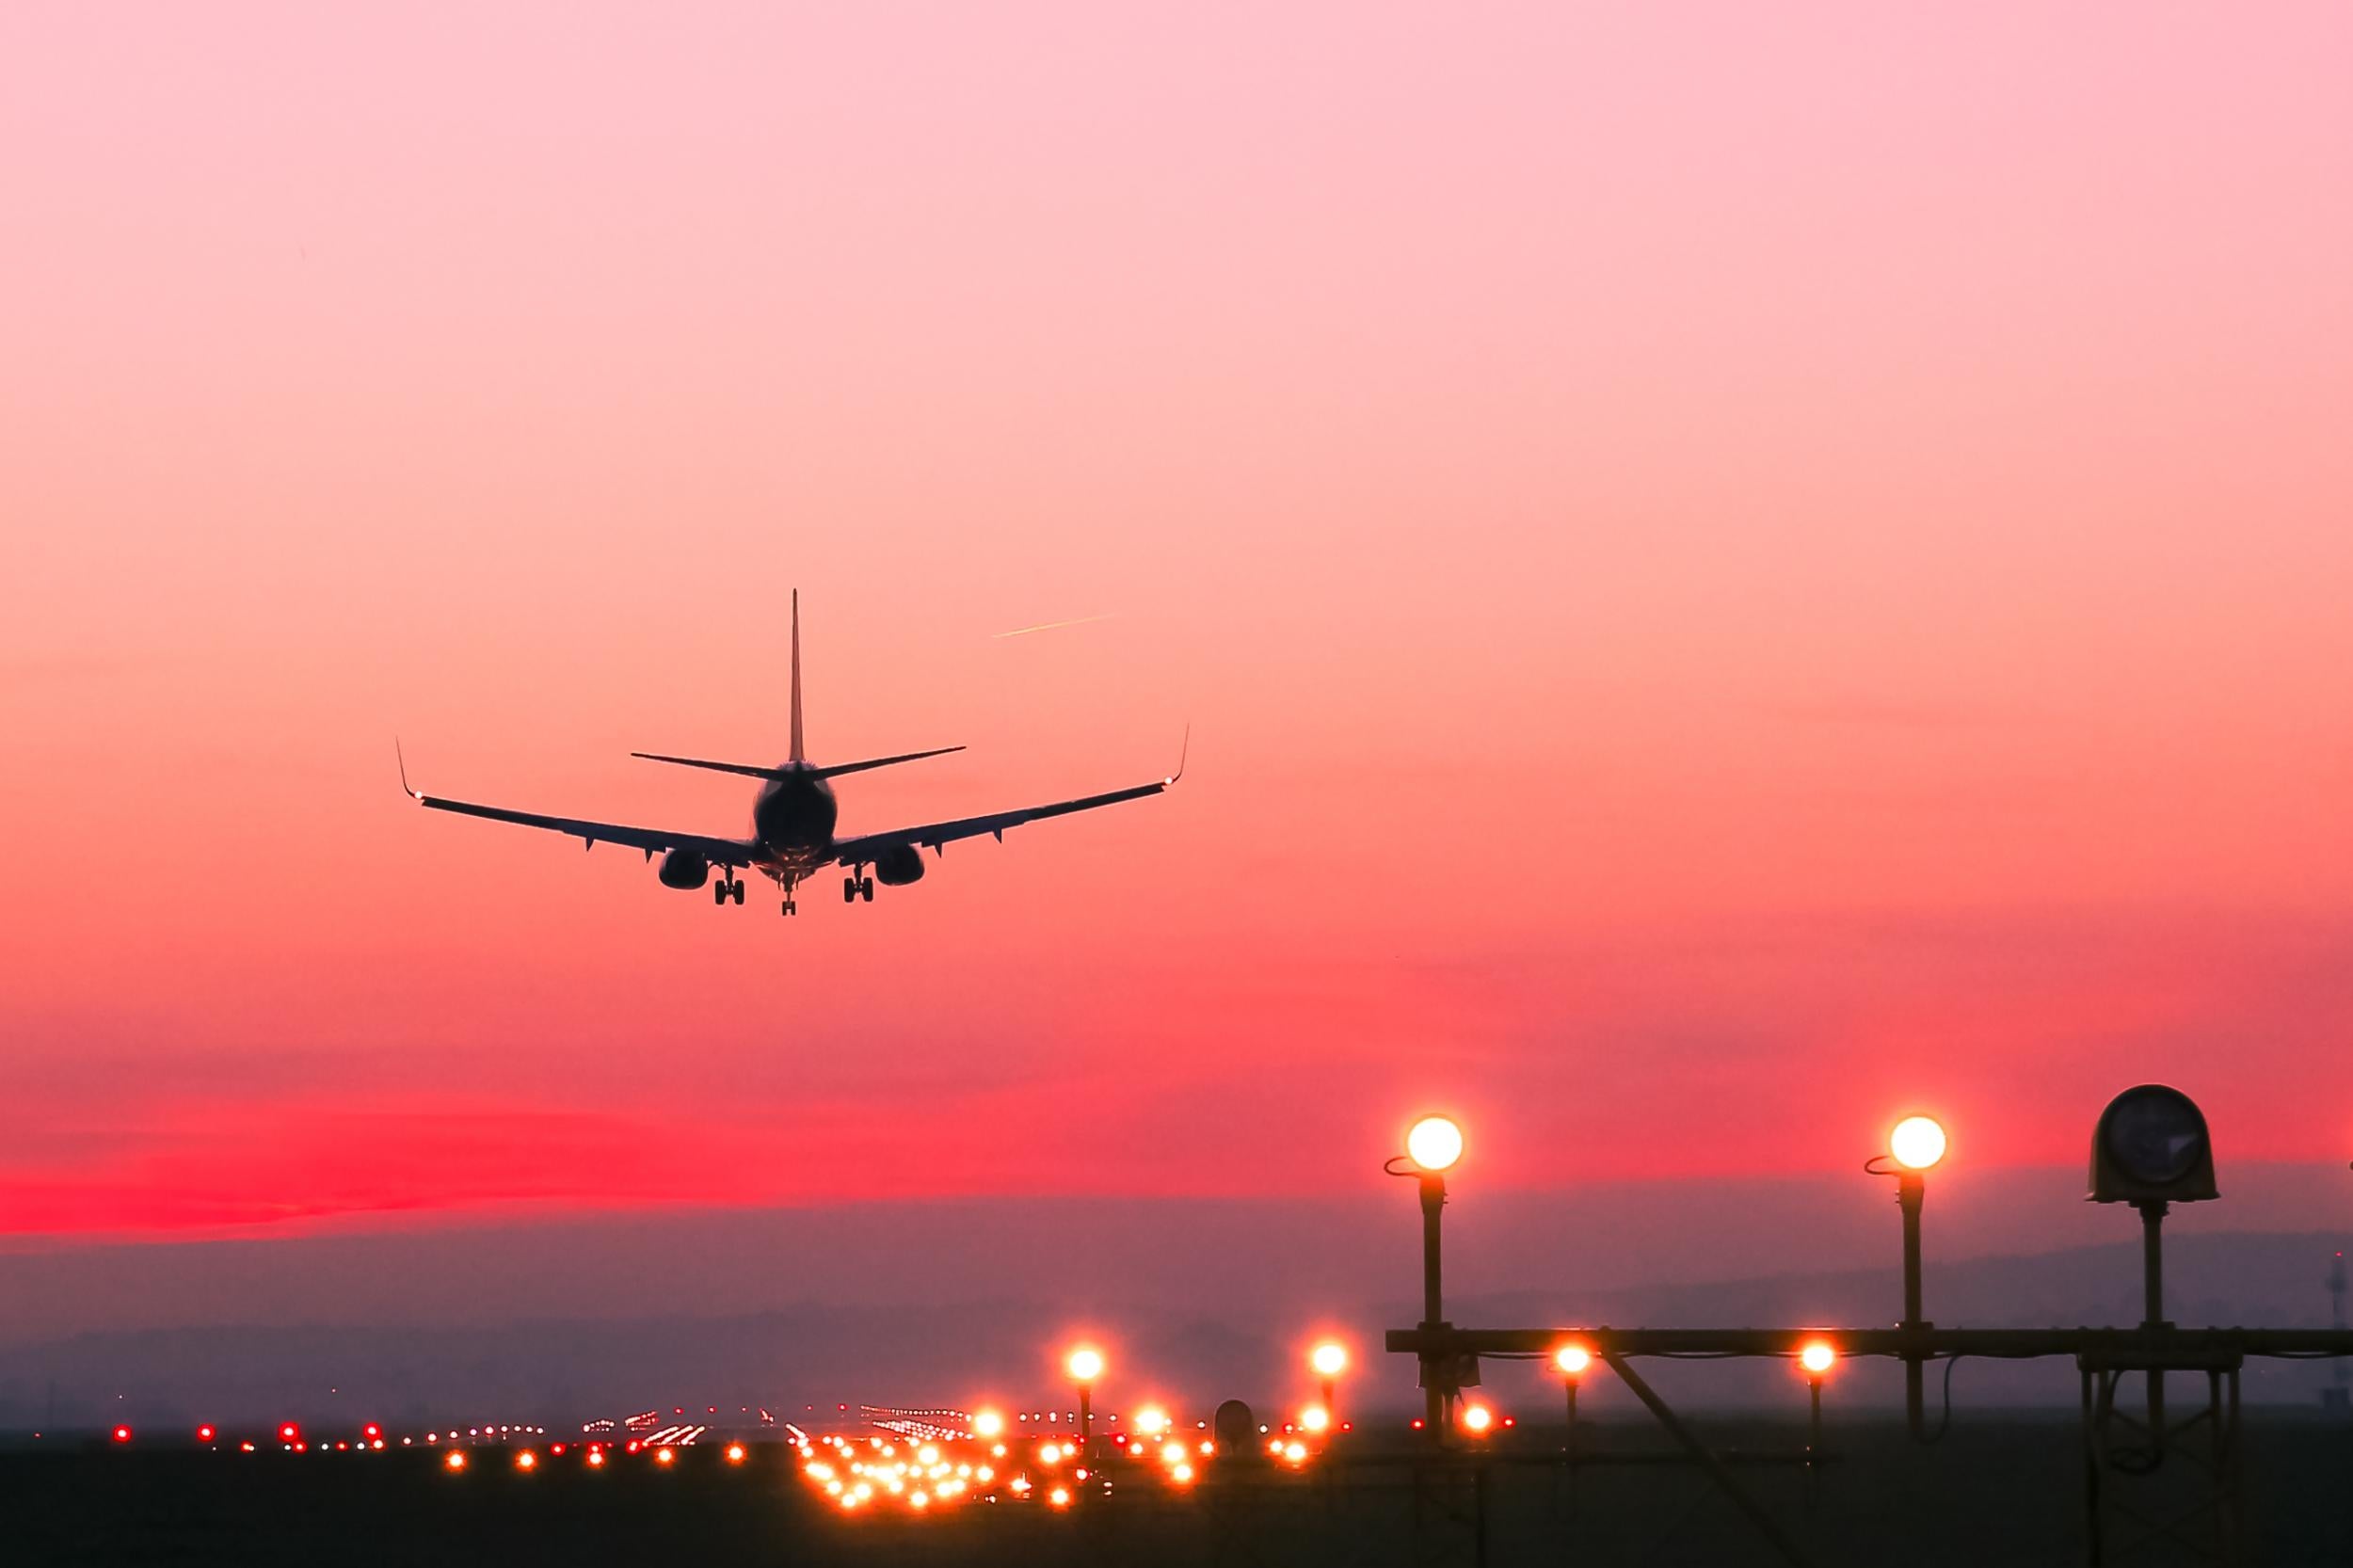 The number of air accidents rose sharply in 2018, according to Iata figures